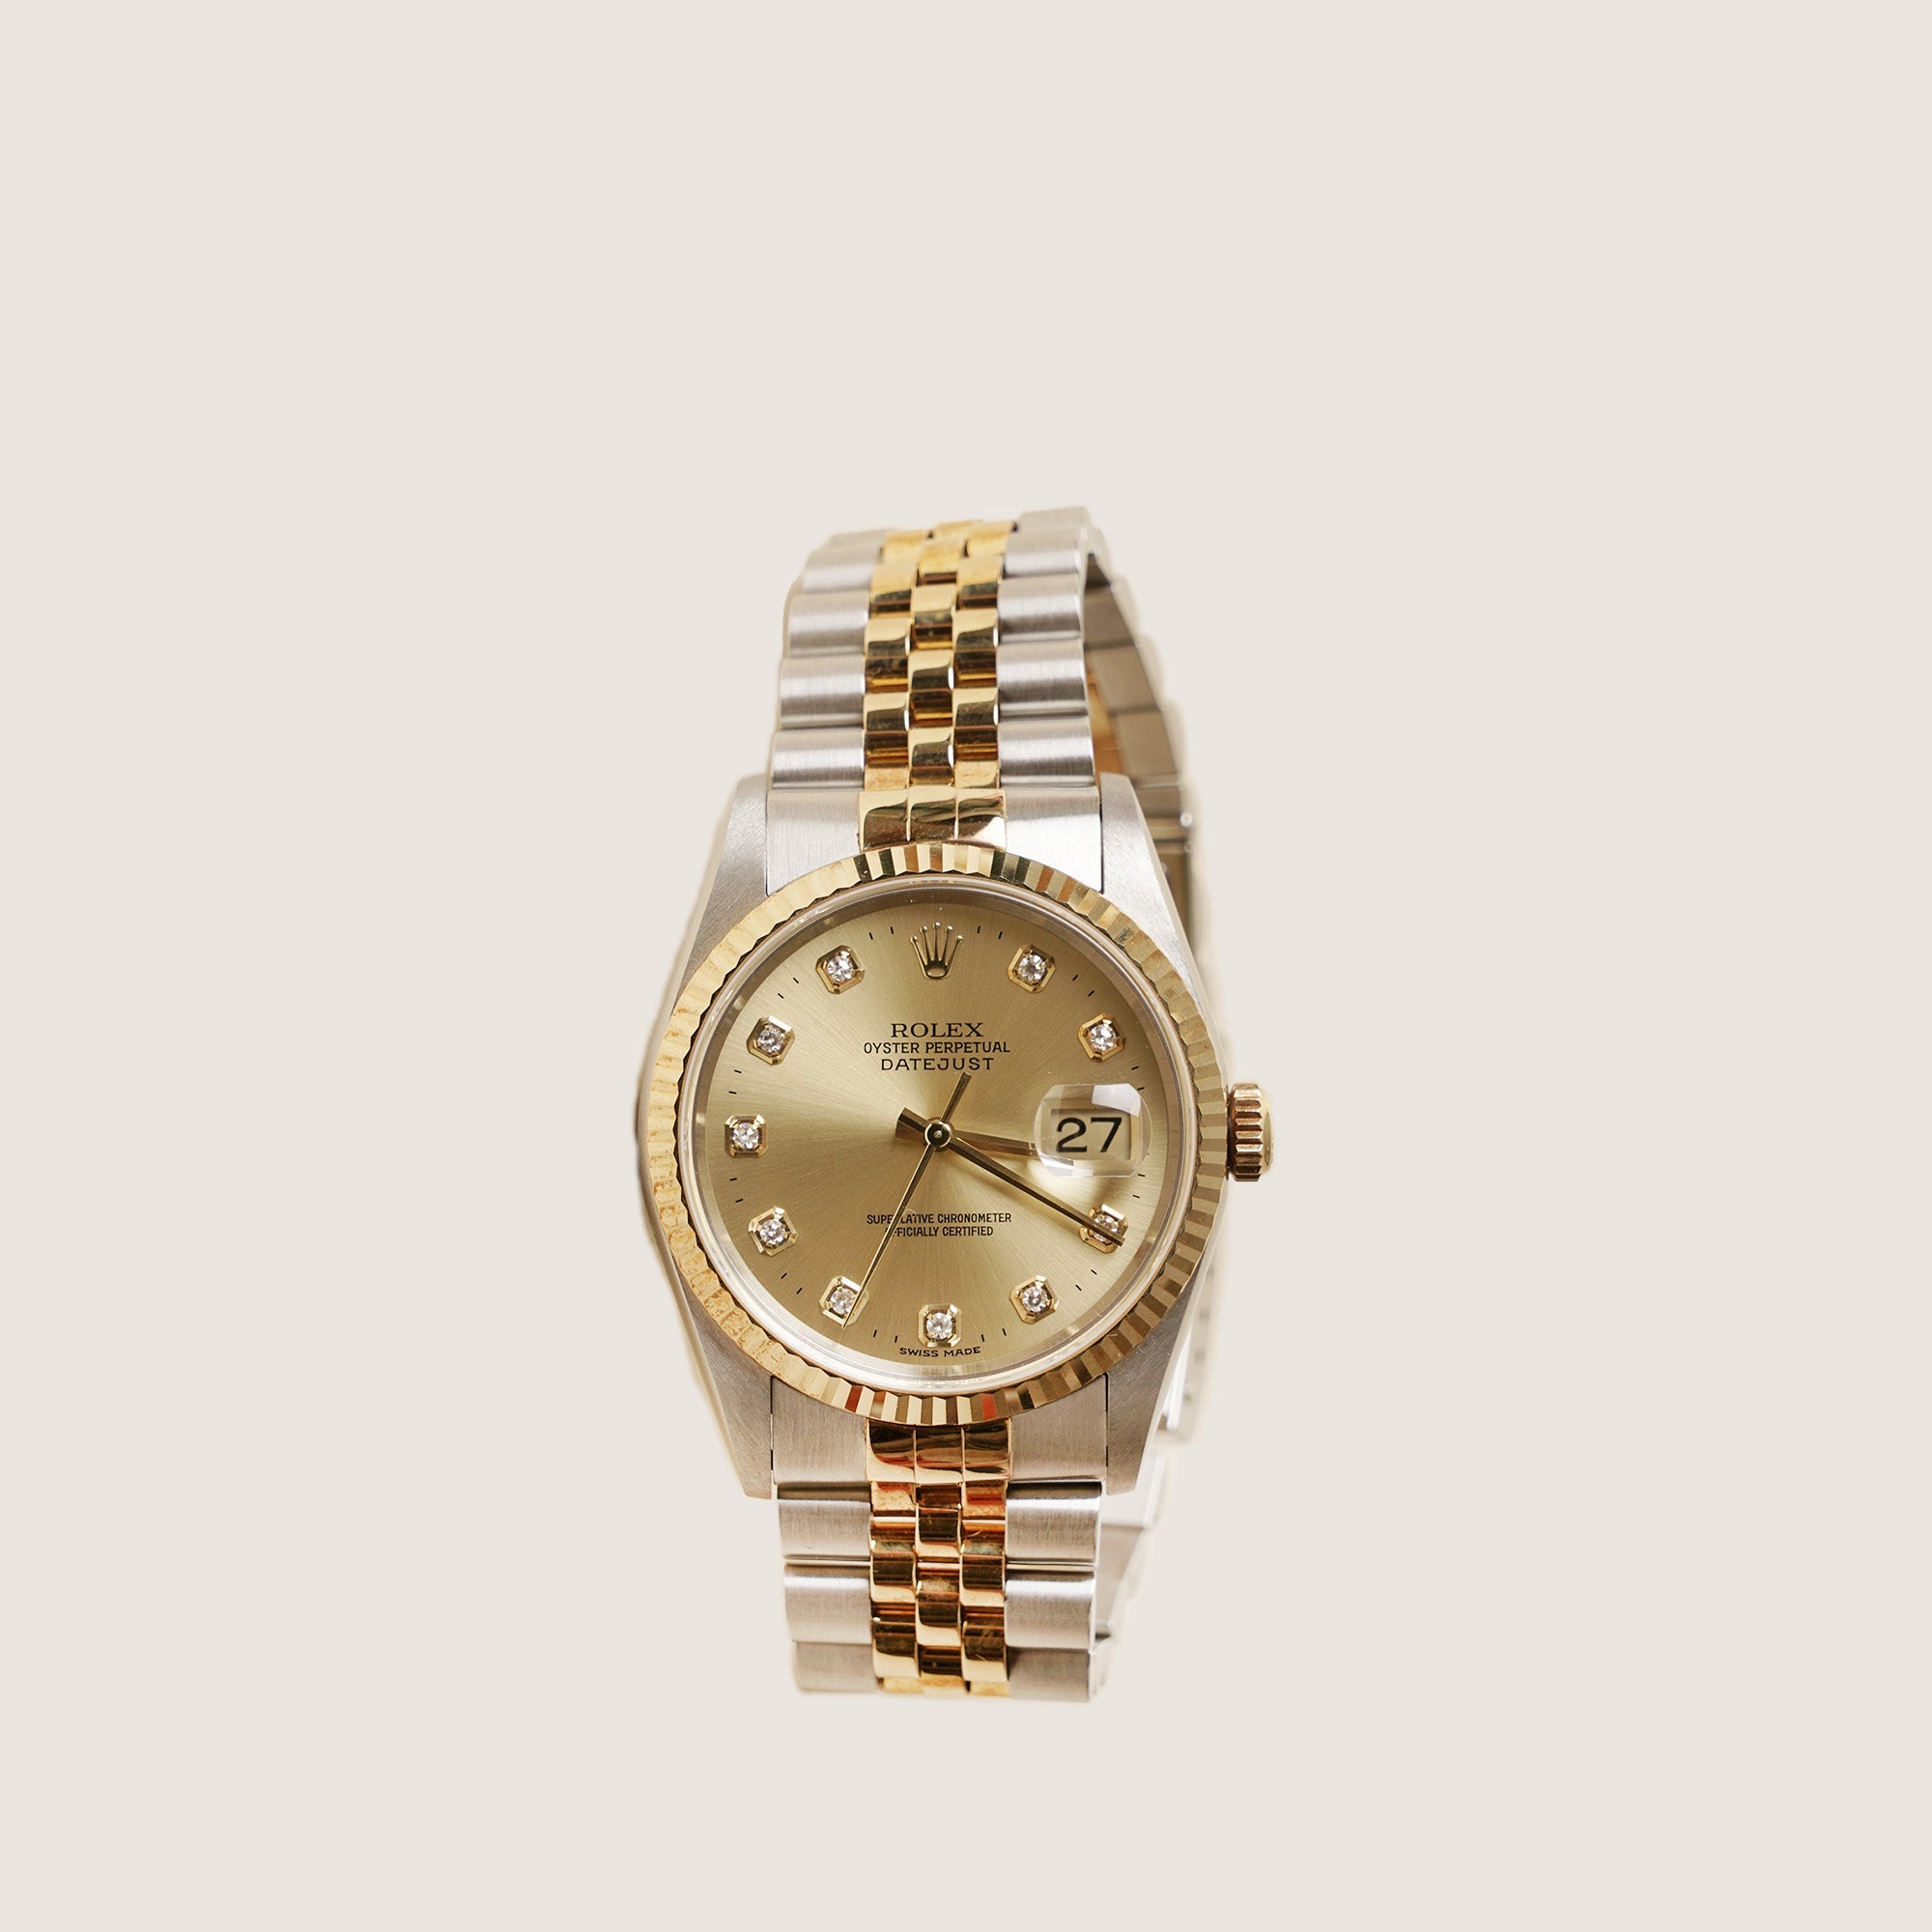 Datejust Oyster Perpetual 36mm Watch - ROLEX - Affordable Luxury